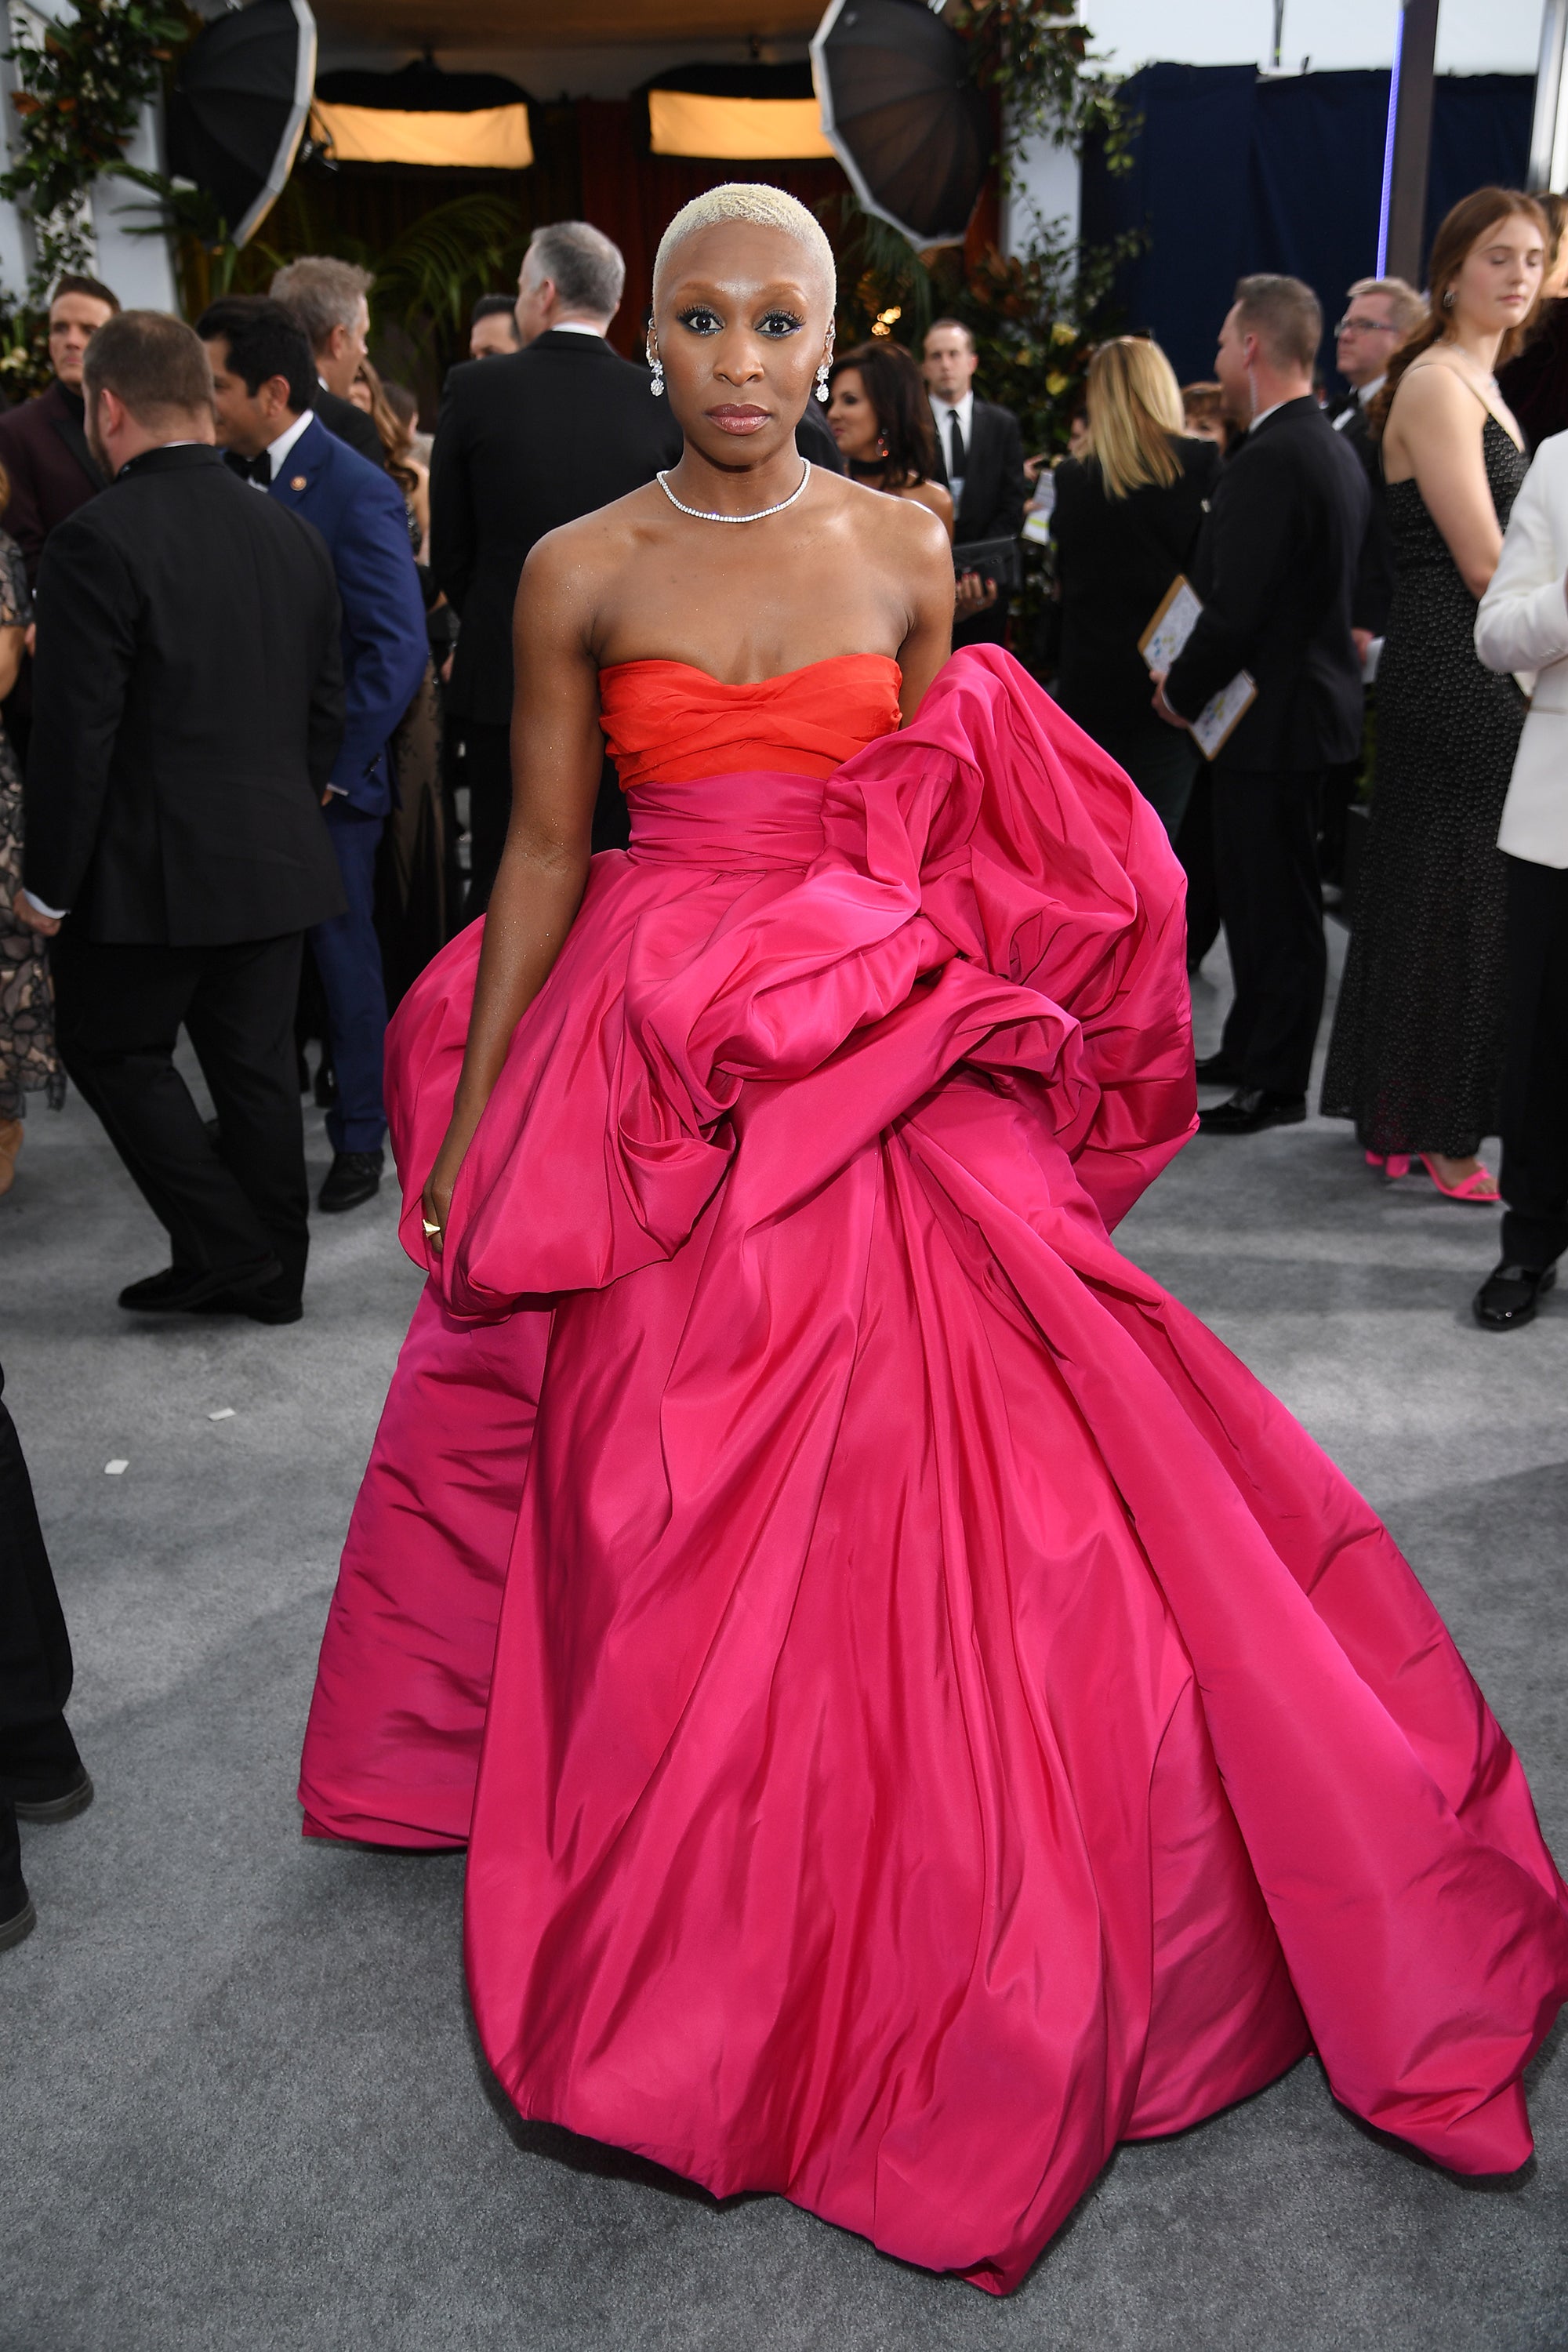 SAG Awards 2023 Red Carpet Fashion: What the Stars Wore